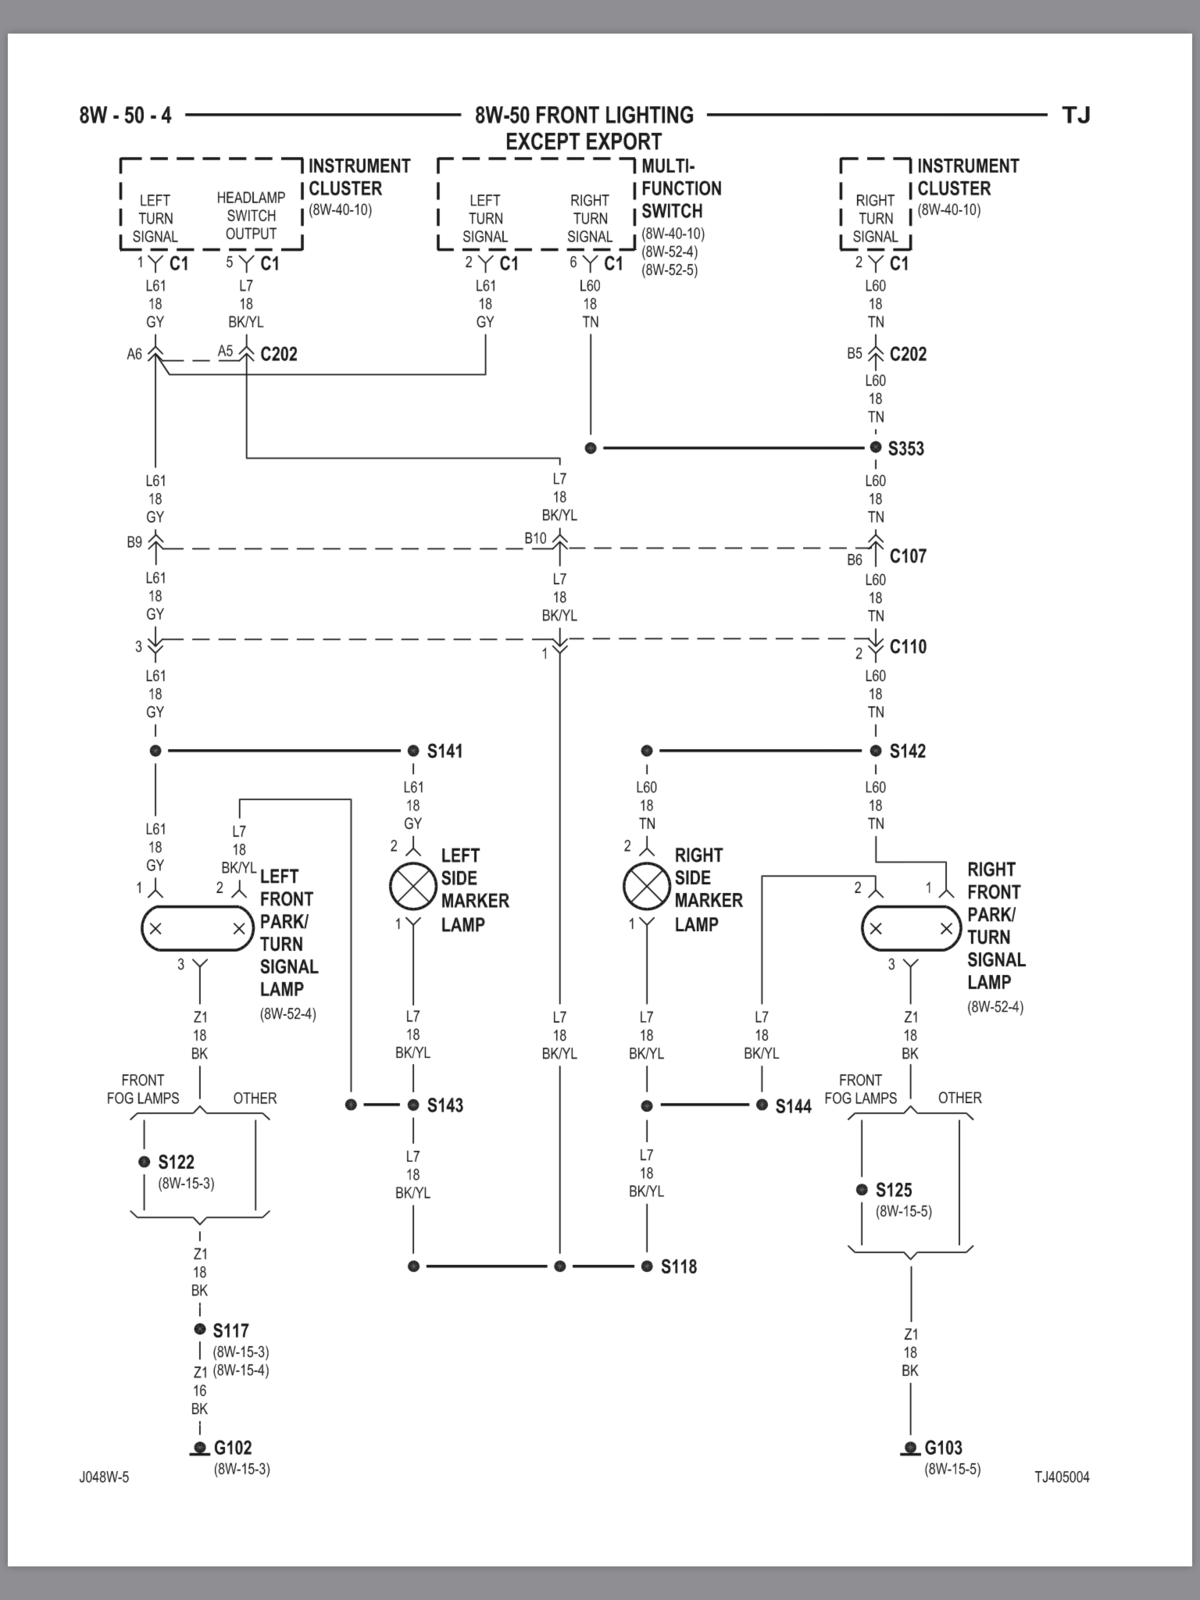 Wiring Guide or Diagram | Jeep Wrangler TJ Forum